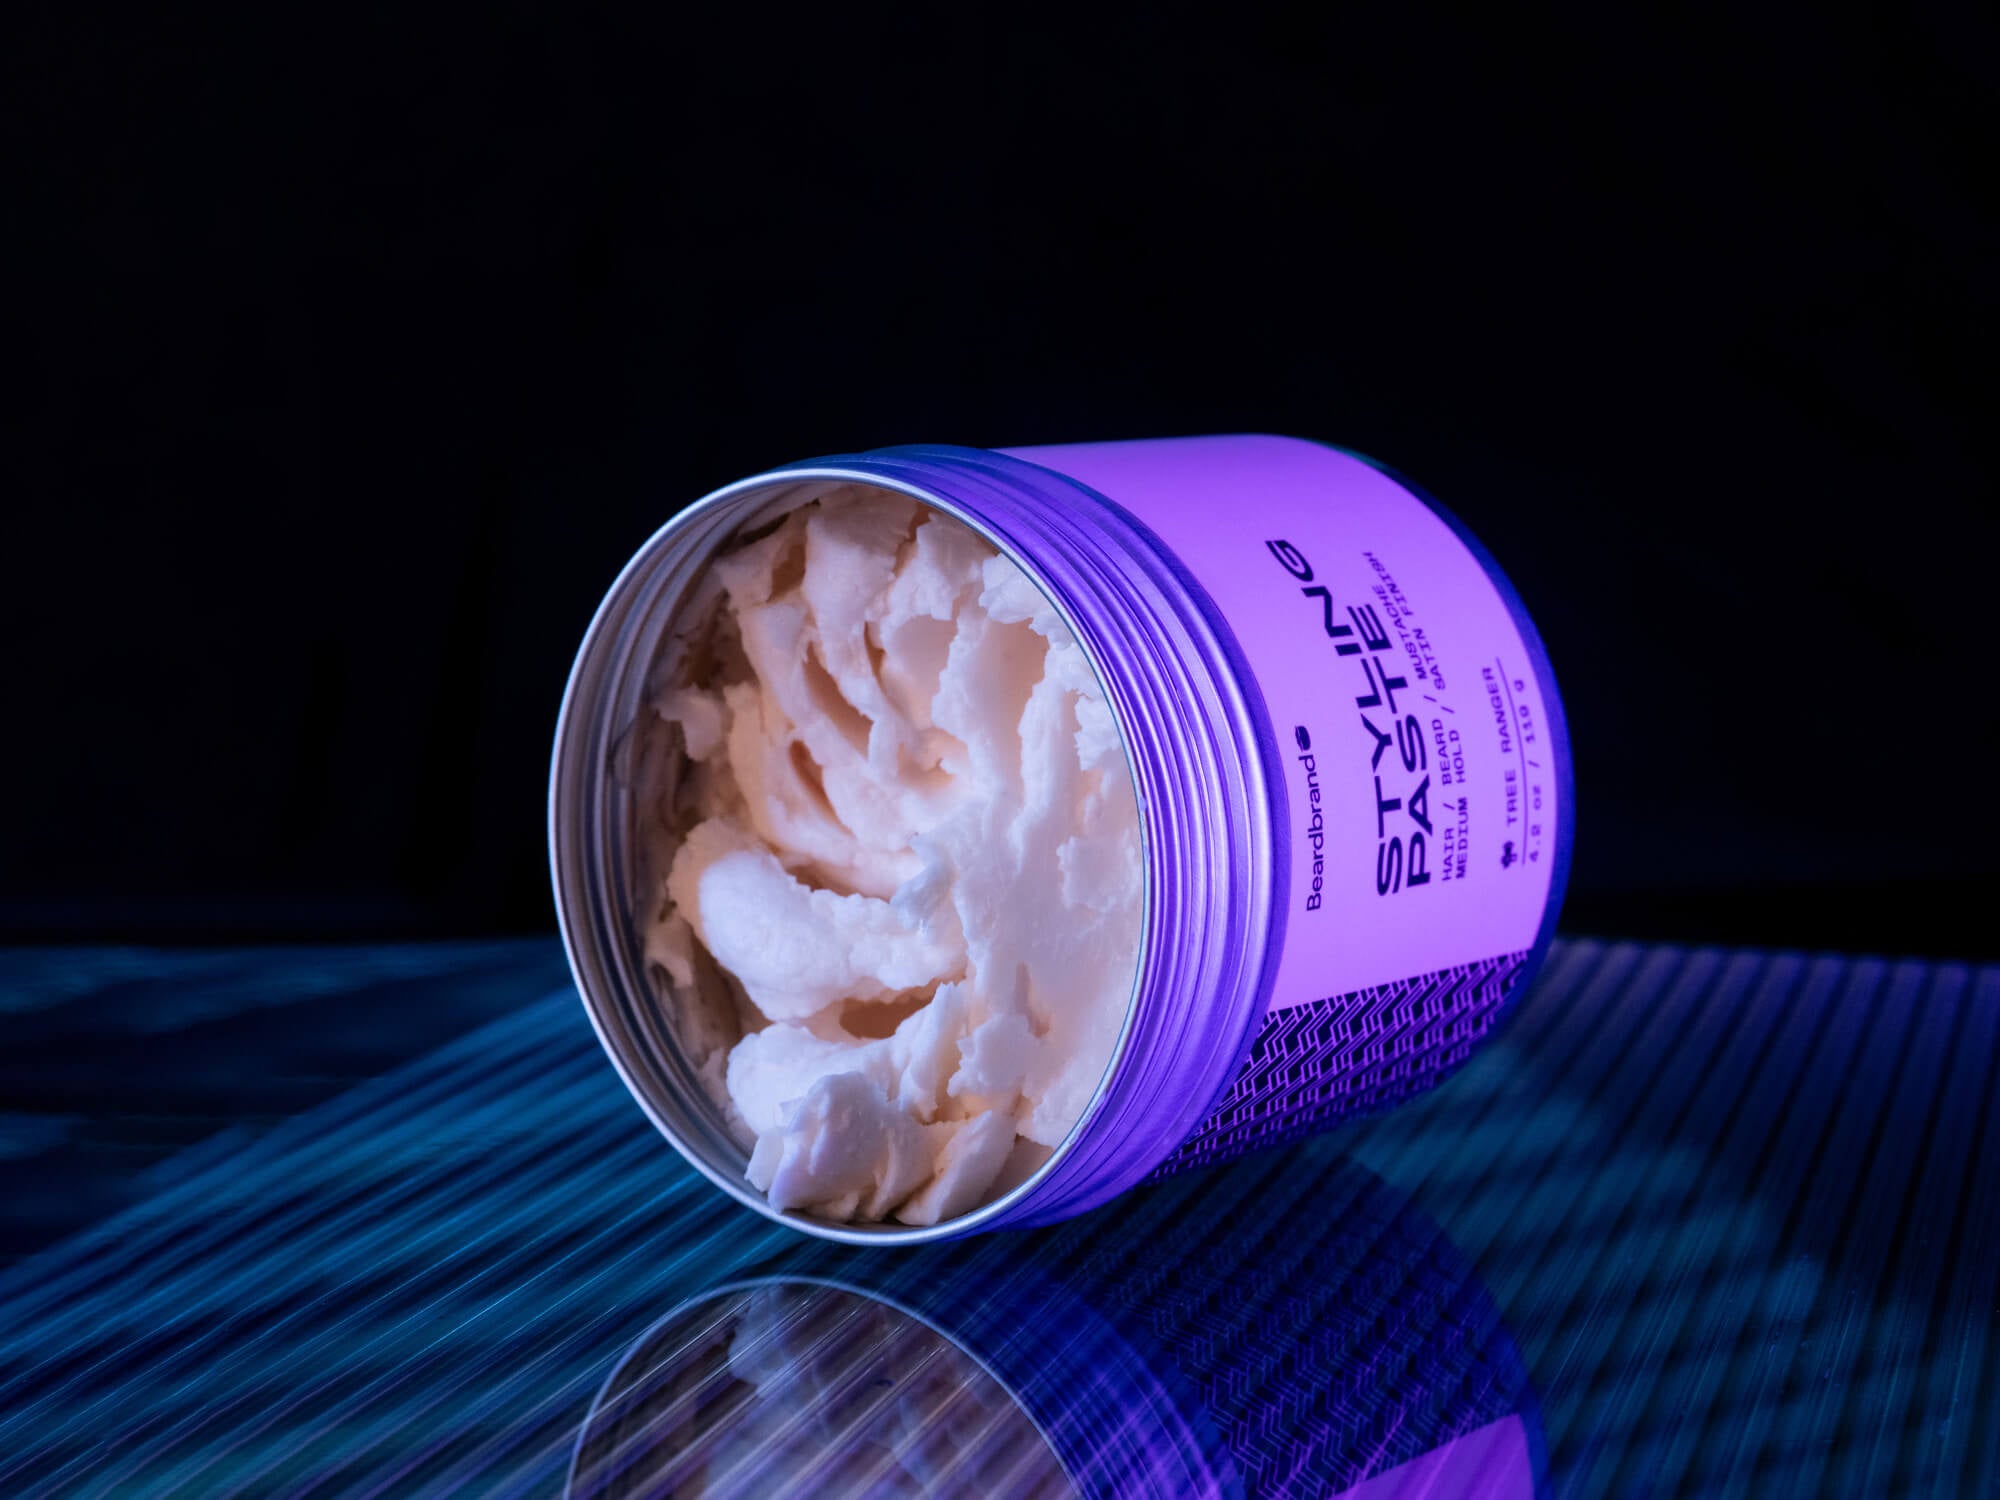 A container of Beardbrand Styling Paste under purple lighting, lying on its side with the lid off, revealing the creamy white product inside.